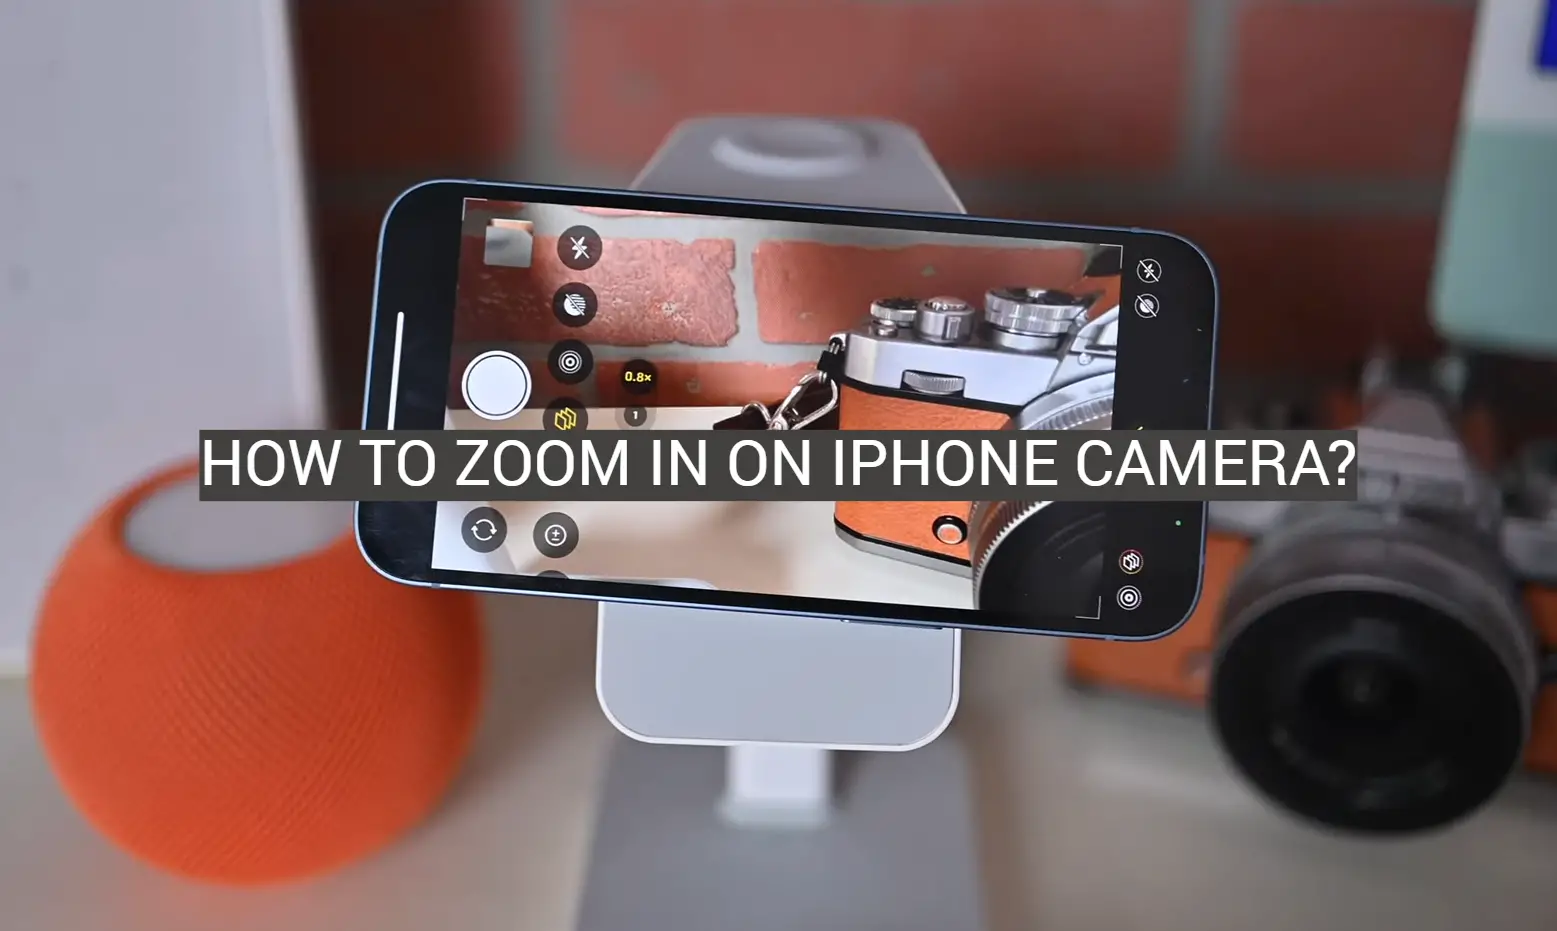 How to Zoom In on iPhone Camera?